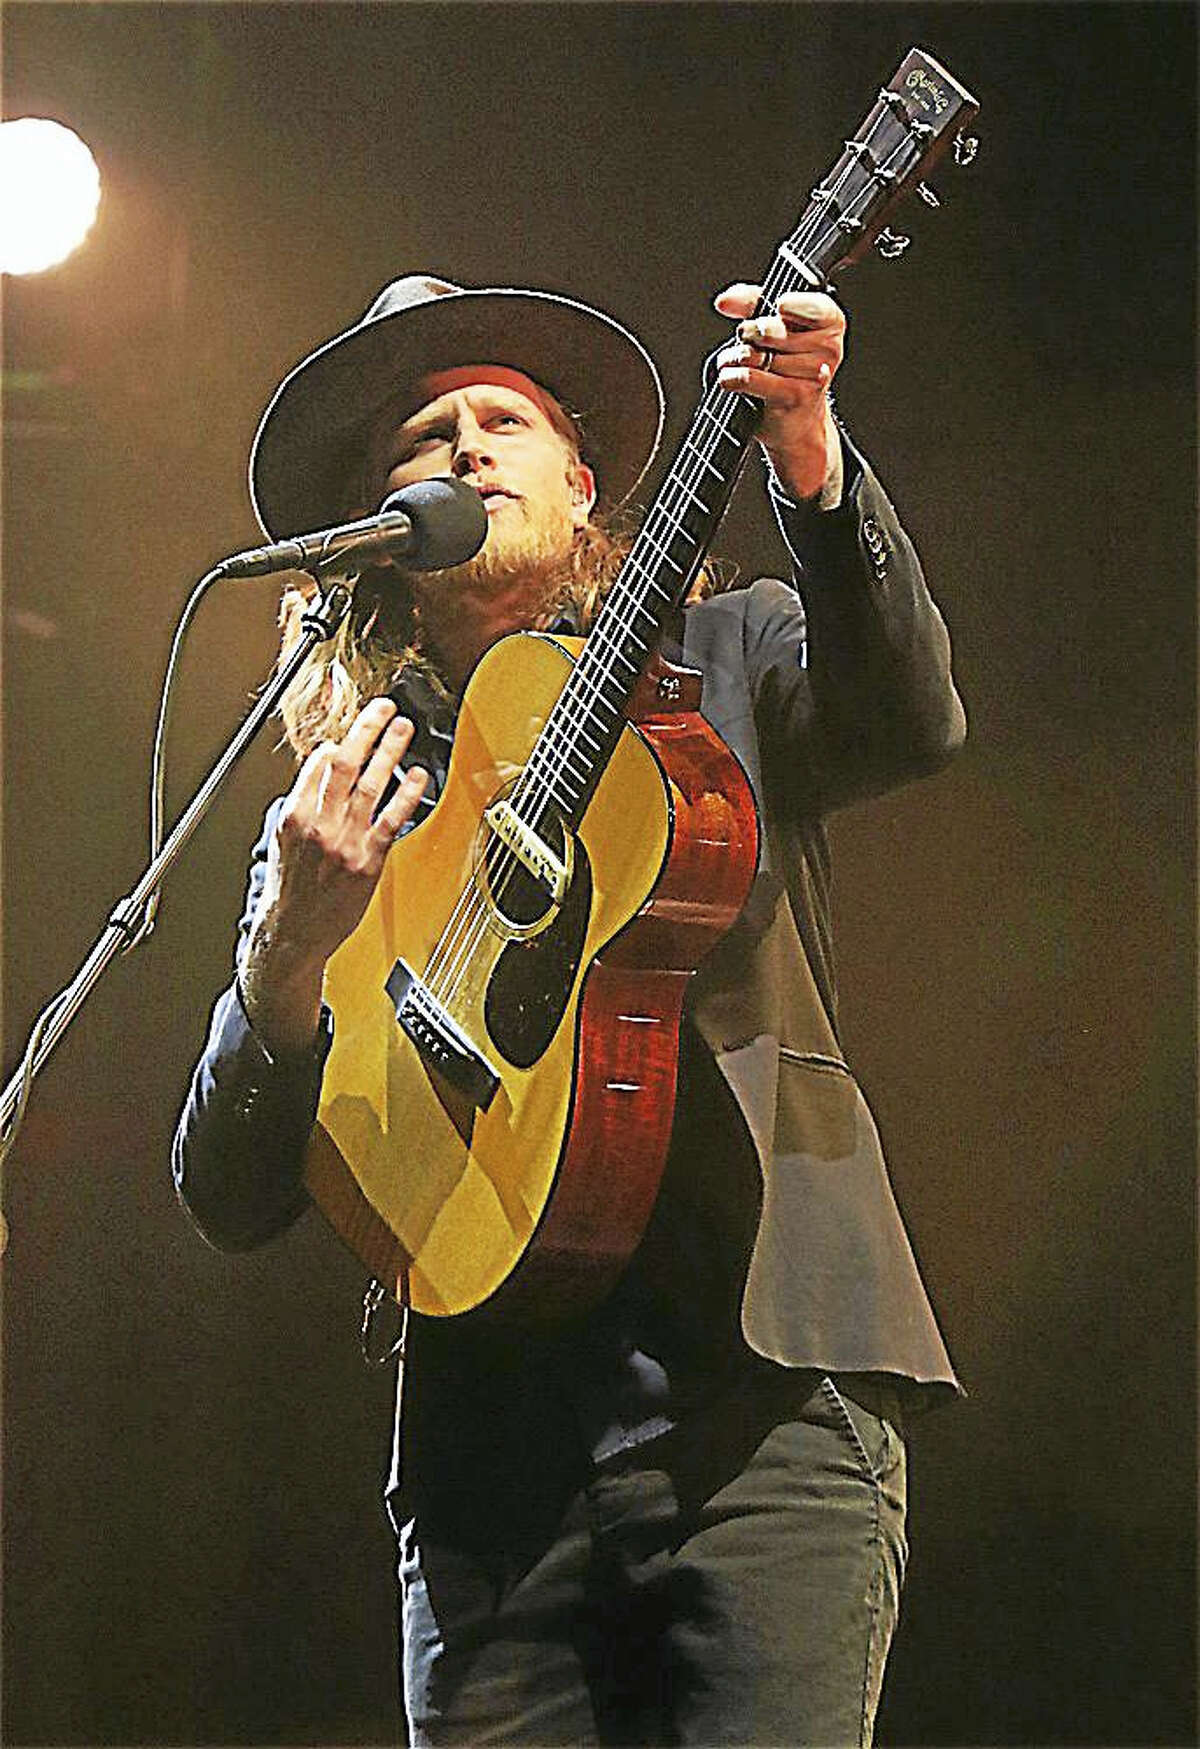 Singer and guitarist Wesley Schultz of The Lumineers performs with the band during a live concert at the Mohegan Sun Arena on March 16. The group is now on tour in support of their latest release “Cleopatra Songbook.” To learn more about The Lumineers, visit www.thelumineers.com